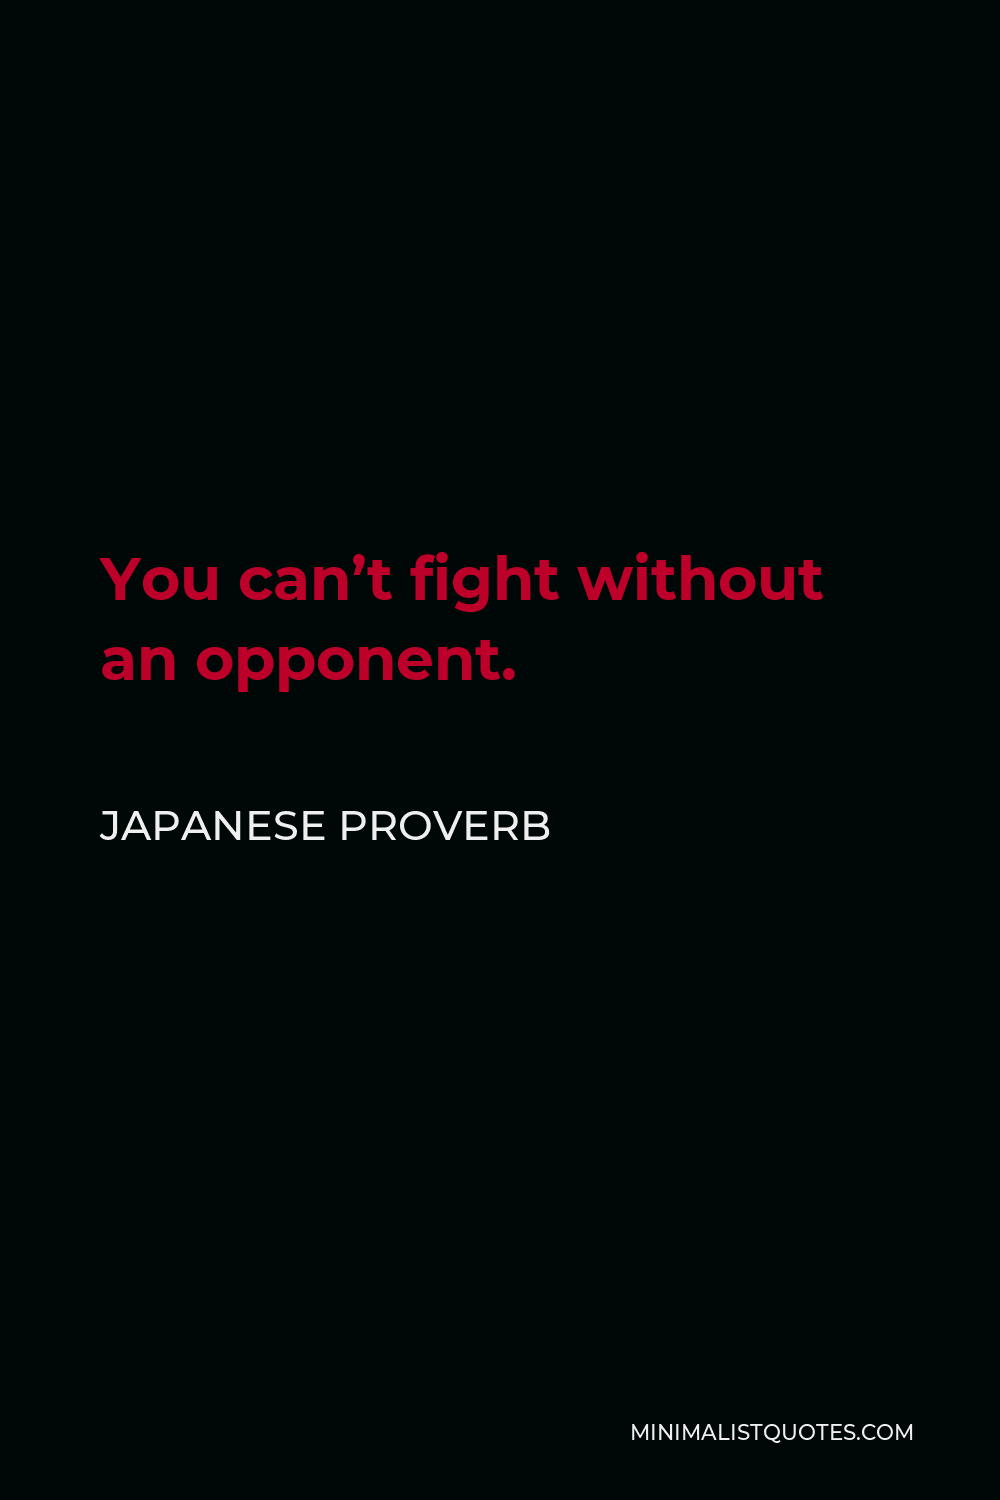 Japanese Proverb Quote - You can’t fight without an opponent.